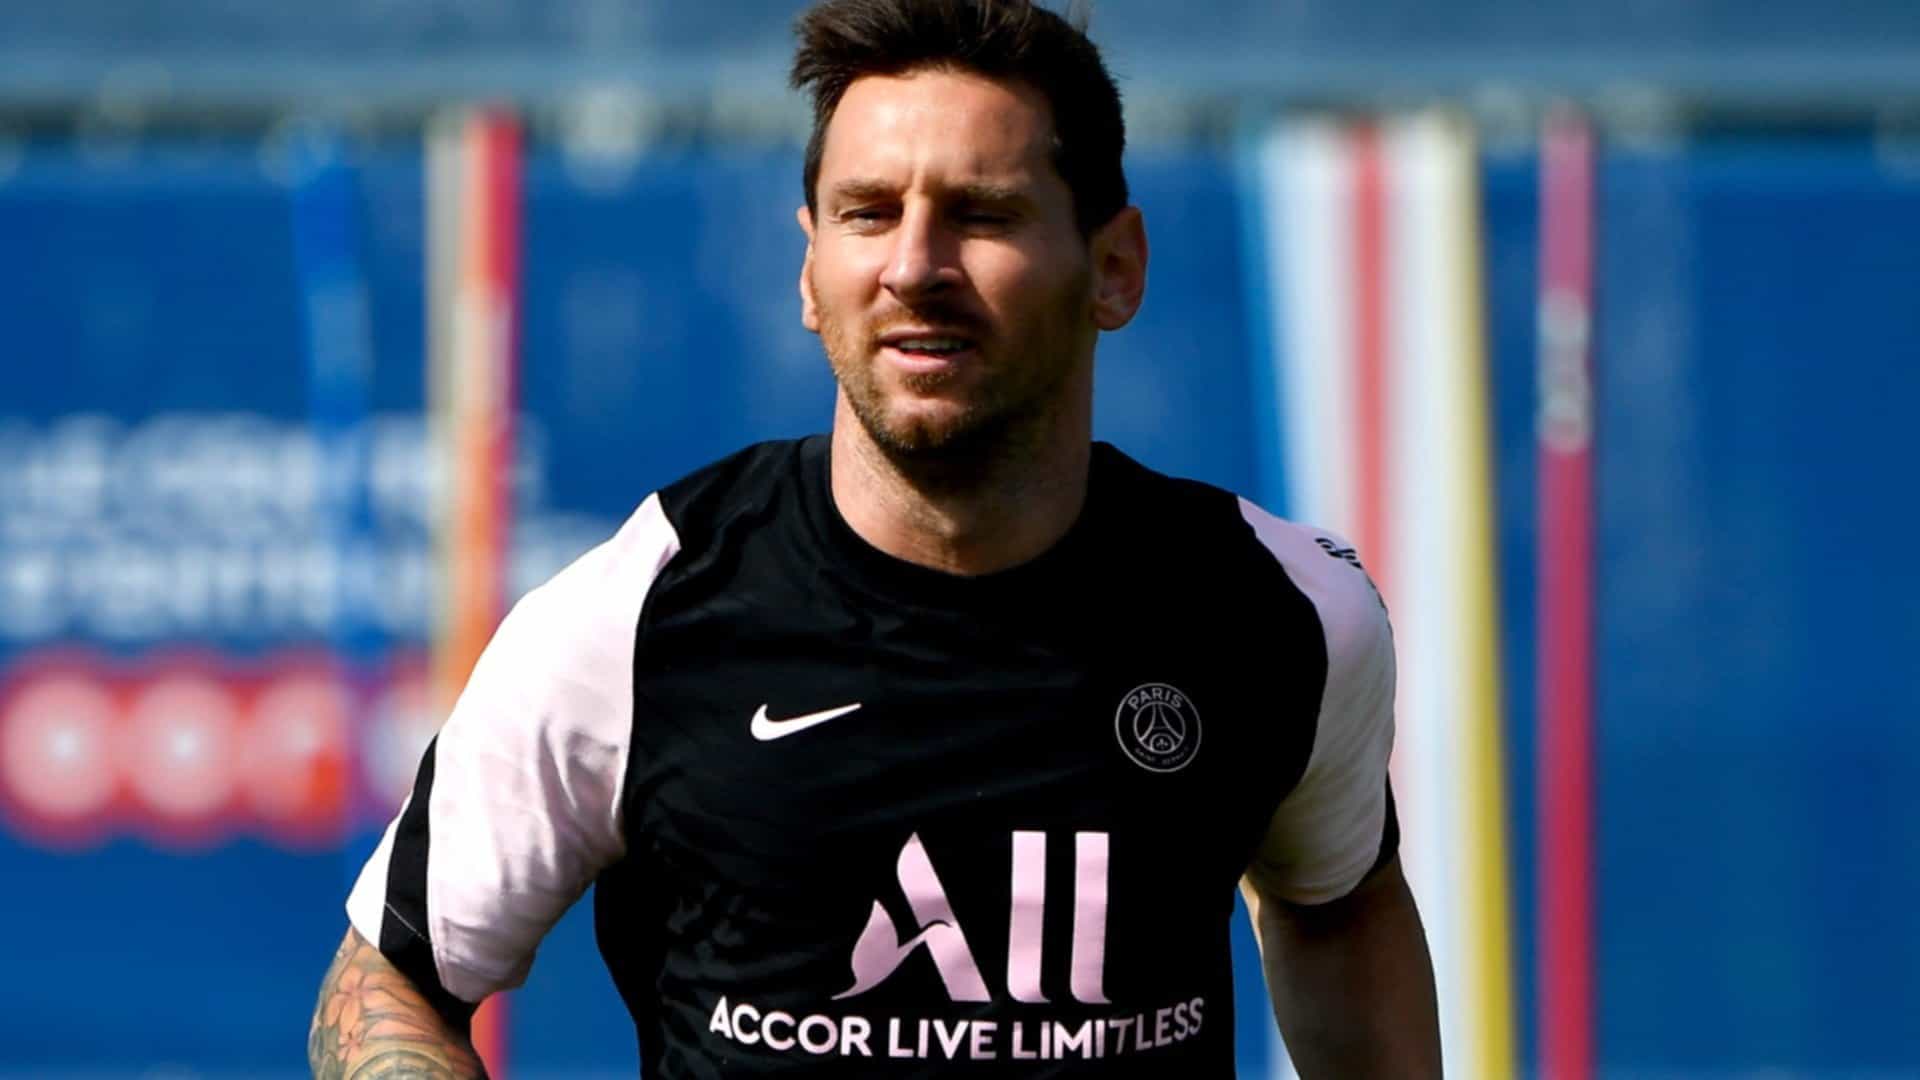 Champions League: Lionel Messi names six clubs that could win trophy this season